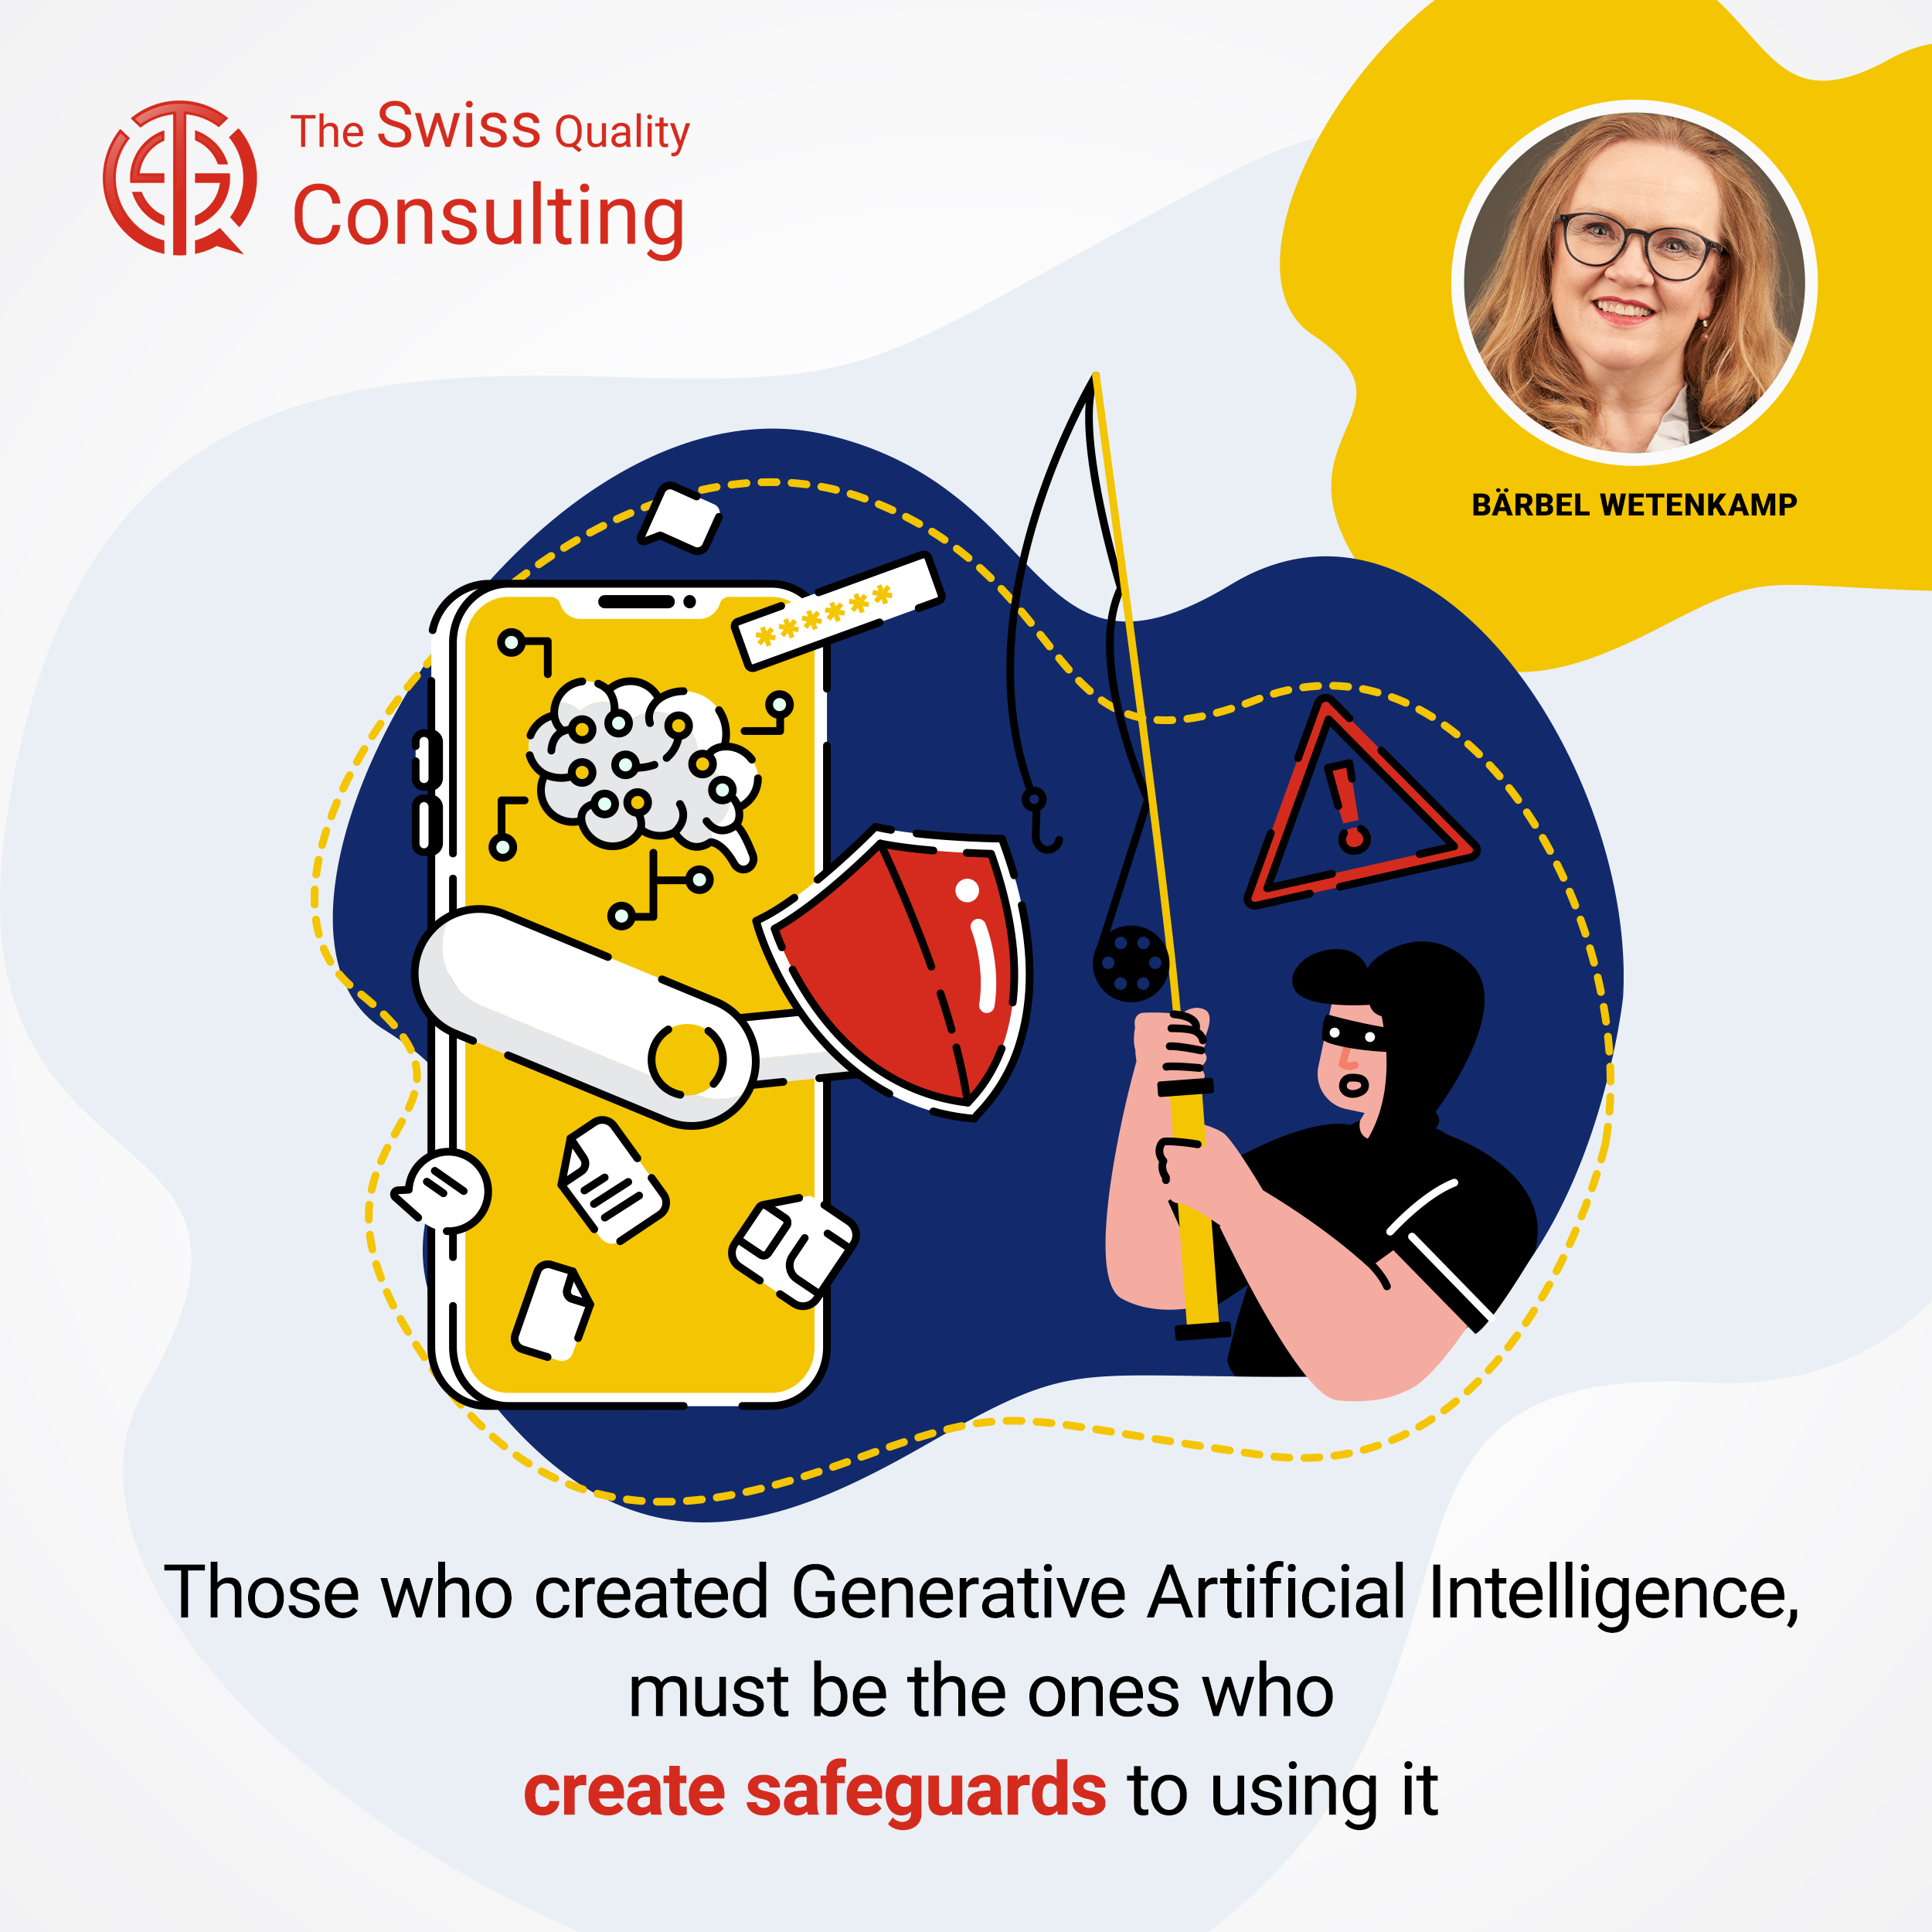 Those who created Generative Artificial Intelligence, must be the ones who create safeguards to using it